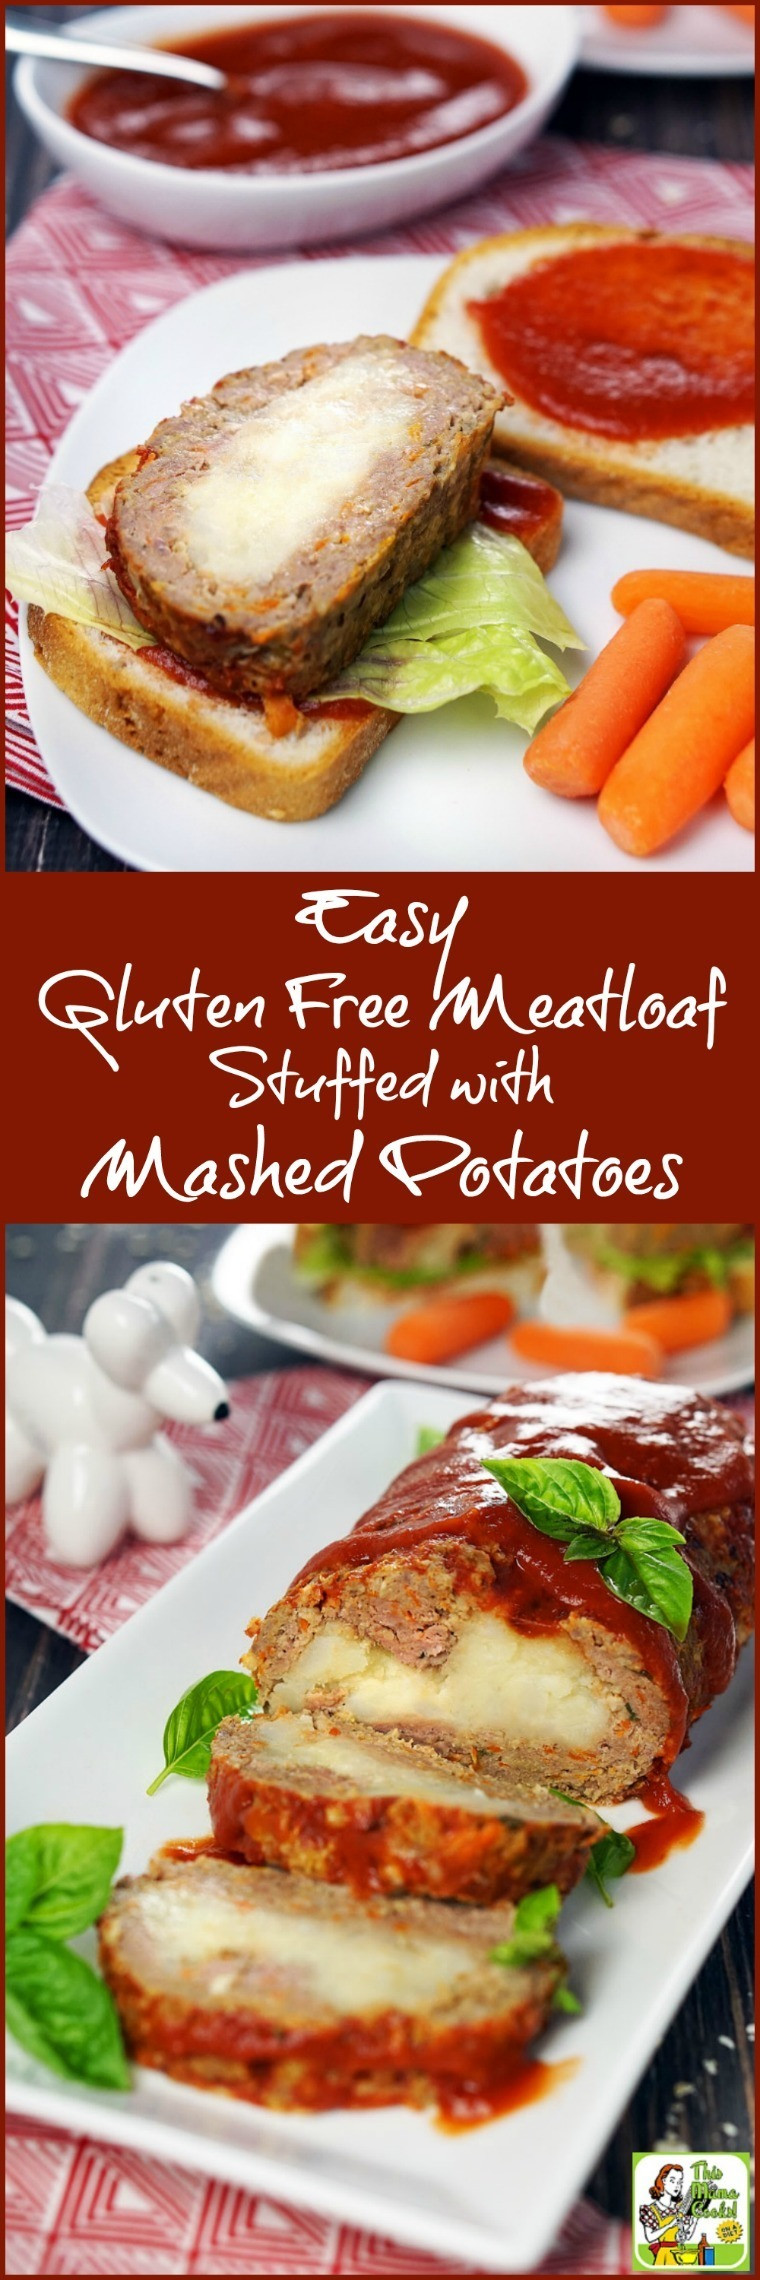 Are Mashed Potatoes Gluten Free
 Easy Gluten Free Meatloaf Stuffed with Mashed Potatoes